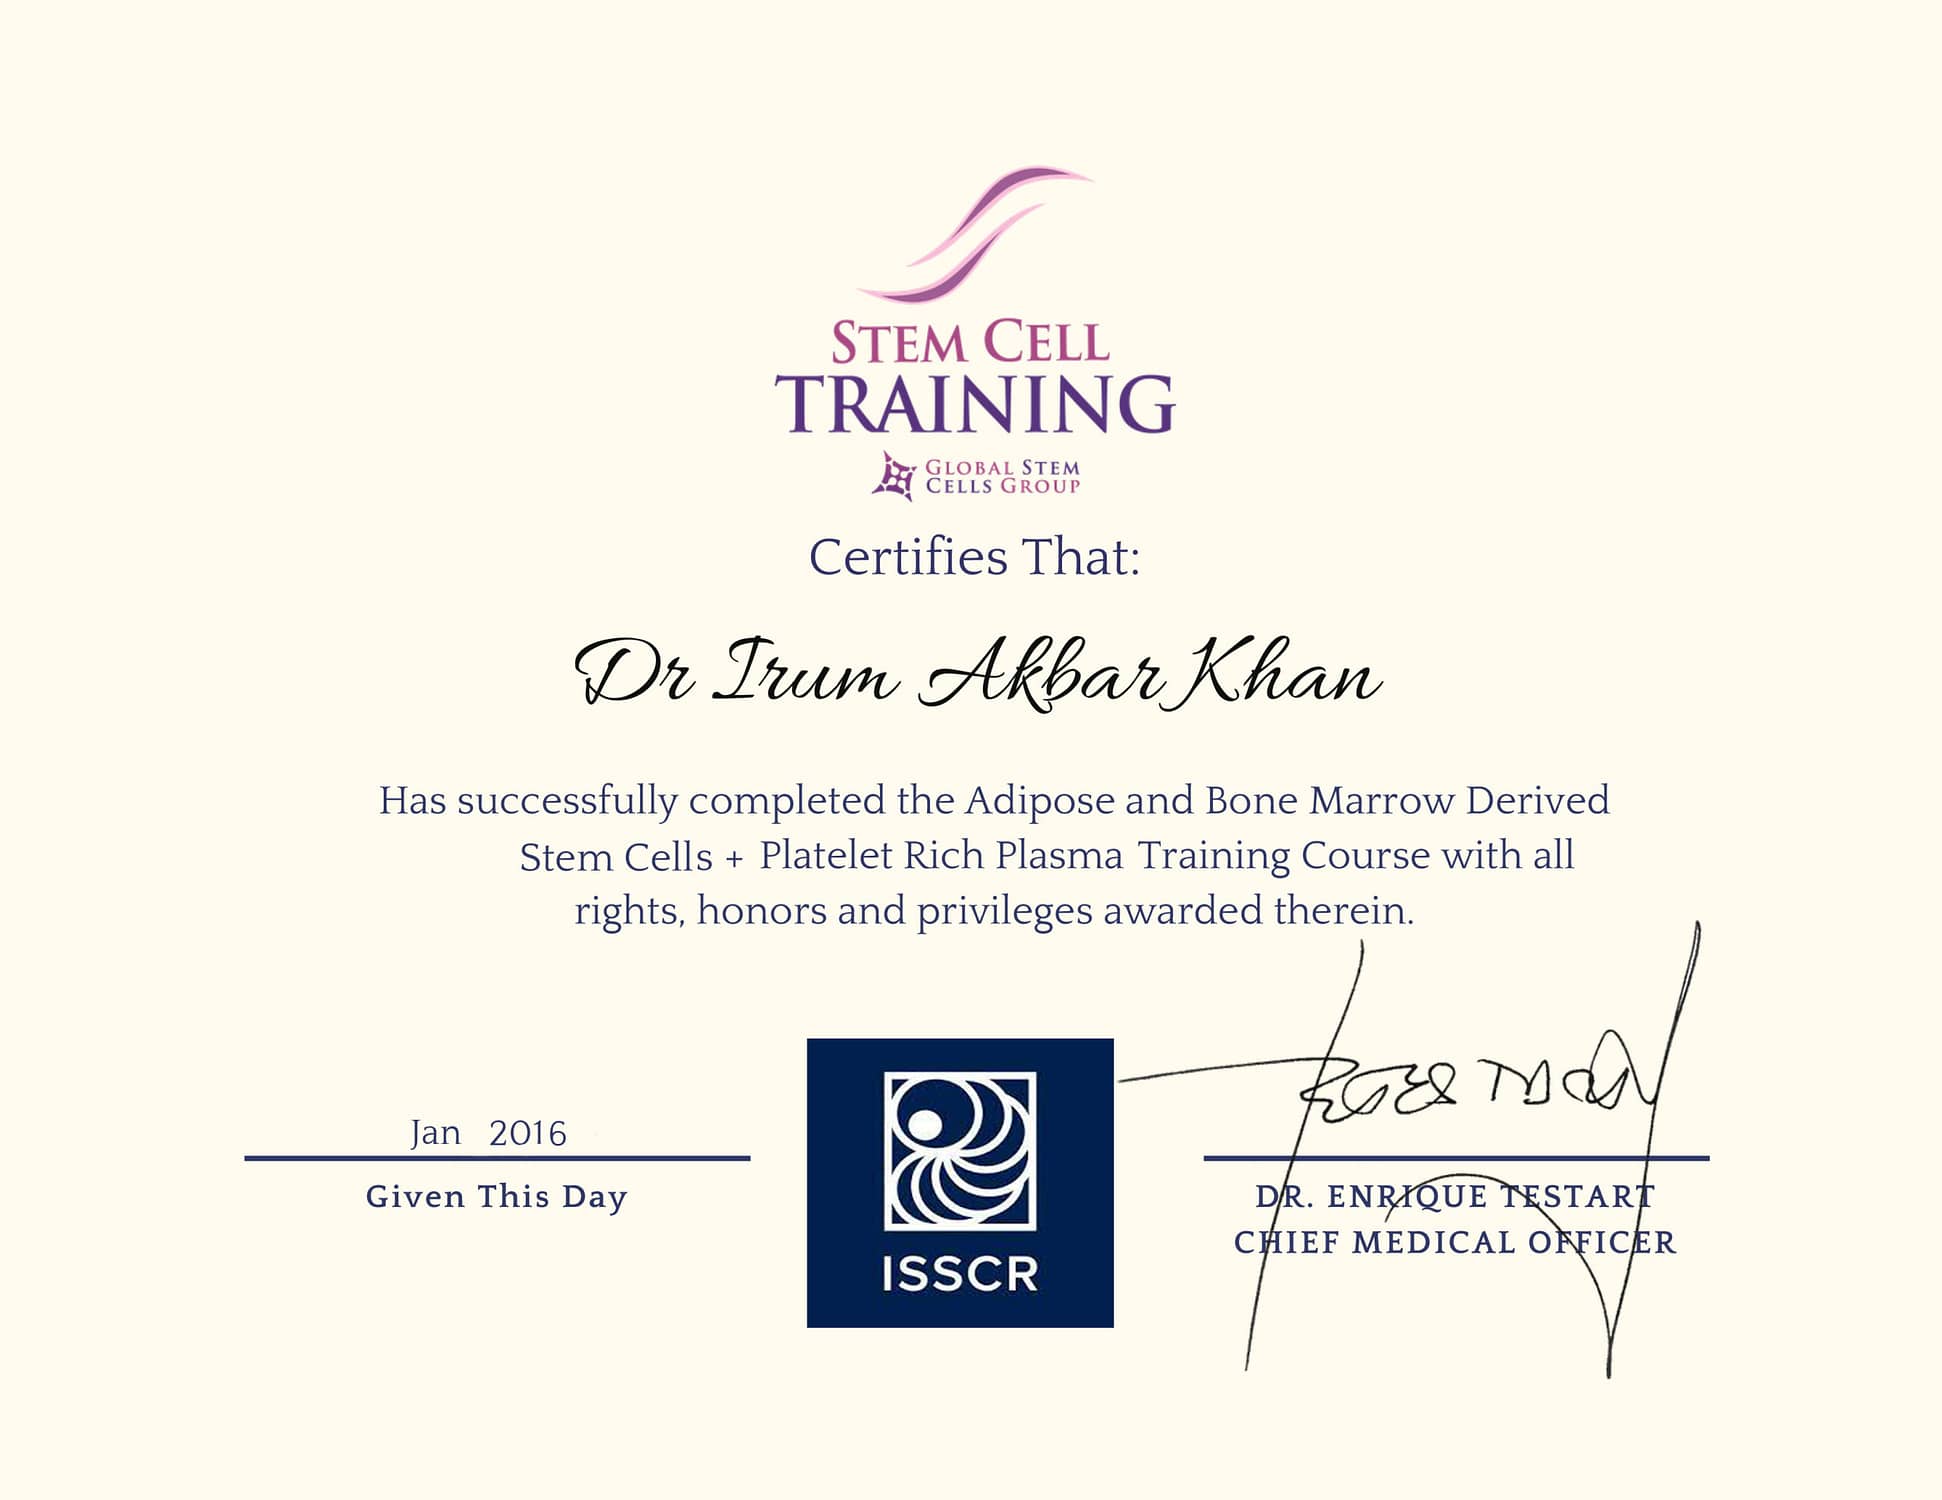 IK Clinics Dr-I-Khan-Stem-Cell-and-PRP-Training-Certicate-2-scaled IK Clinics Professional Qualifications  